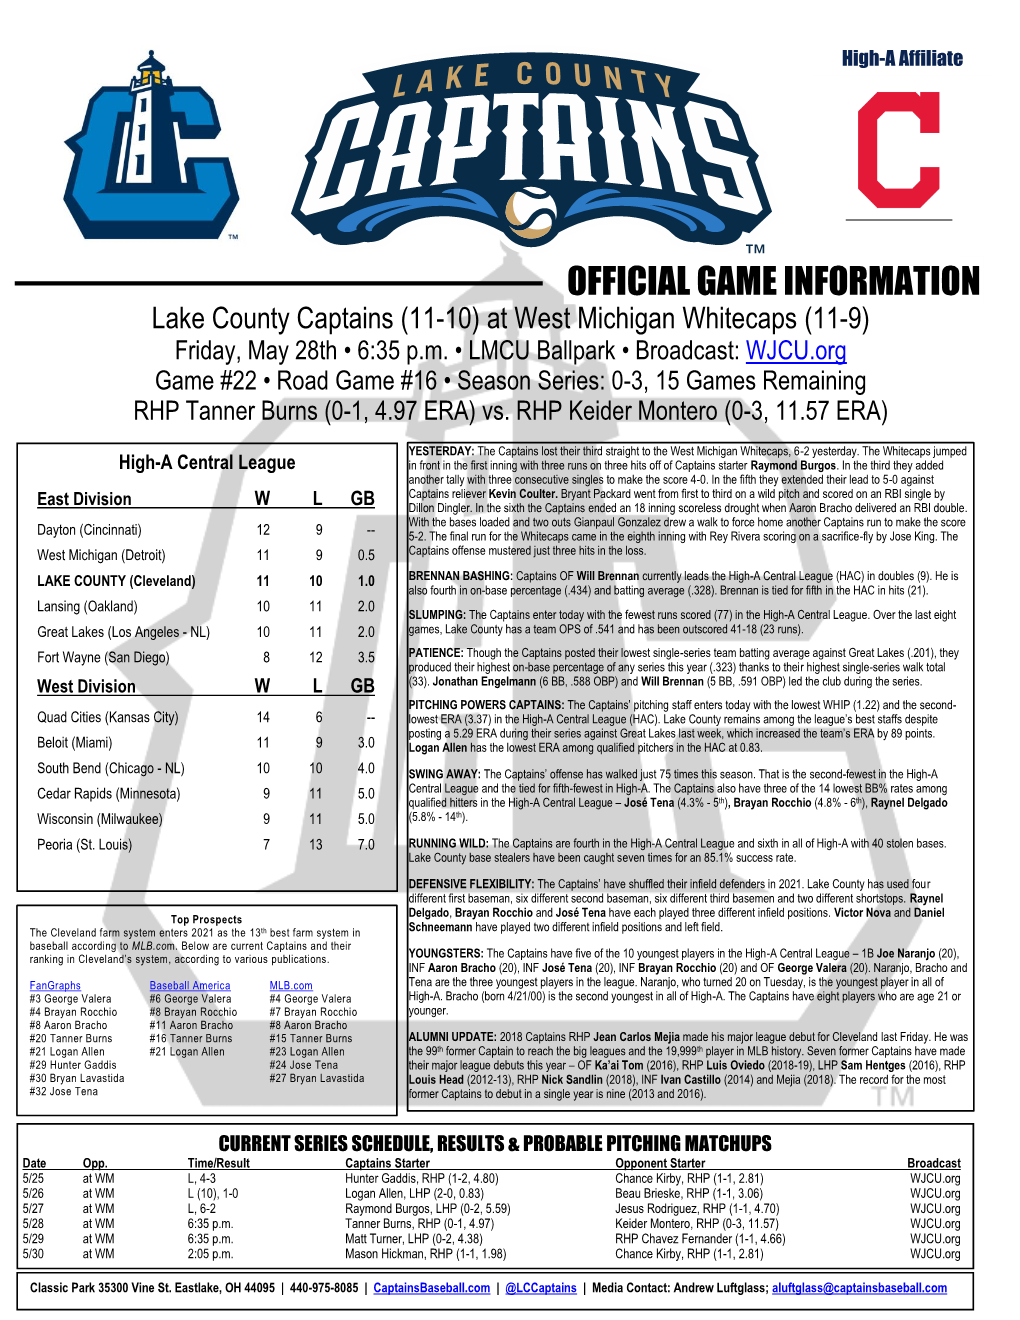 OFFICIAL GAME INFORMATION Lake County Captains (11-10) at West Michigan Whitecaps (11-9) Friday, May 28Th • 6:35 P.M